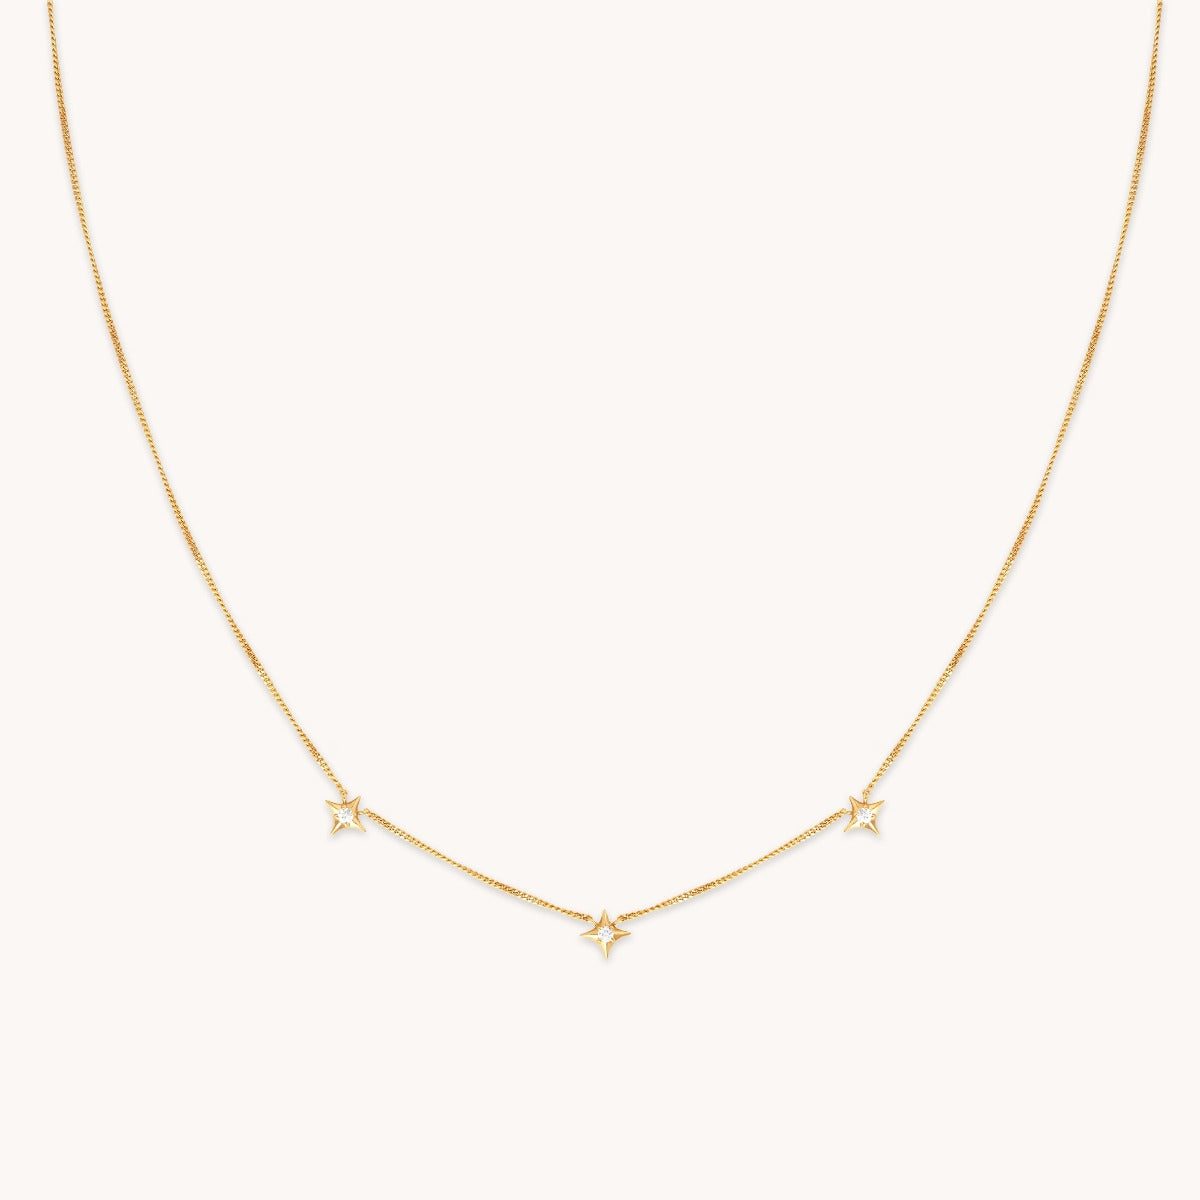 B Pavé Initial Silver Necklace Astrid Miyu Necklaces, 54% OFF